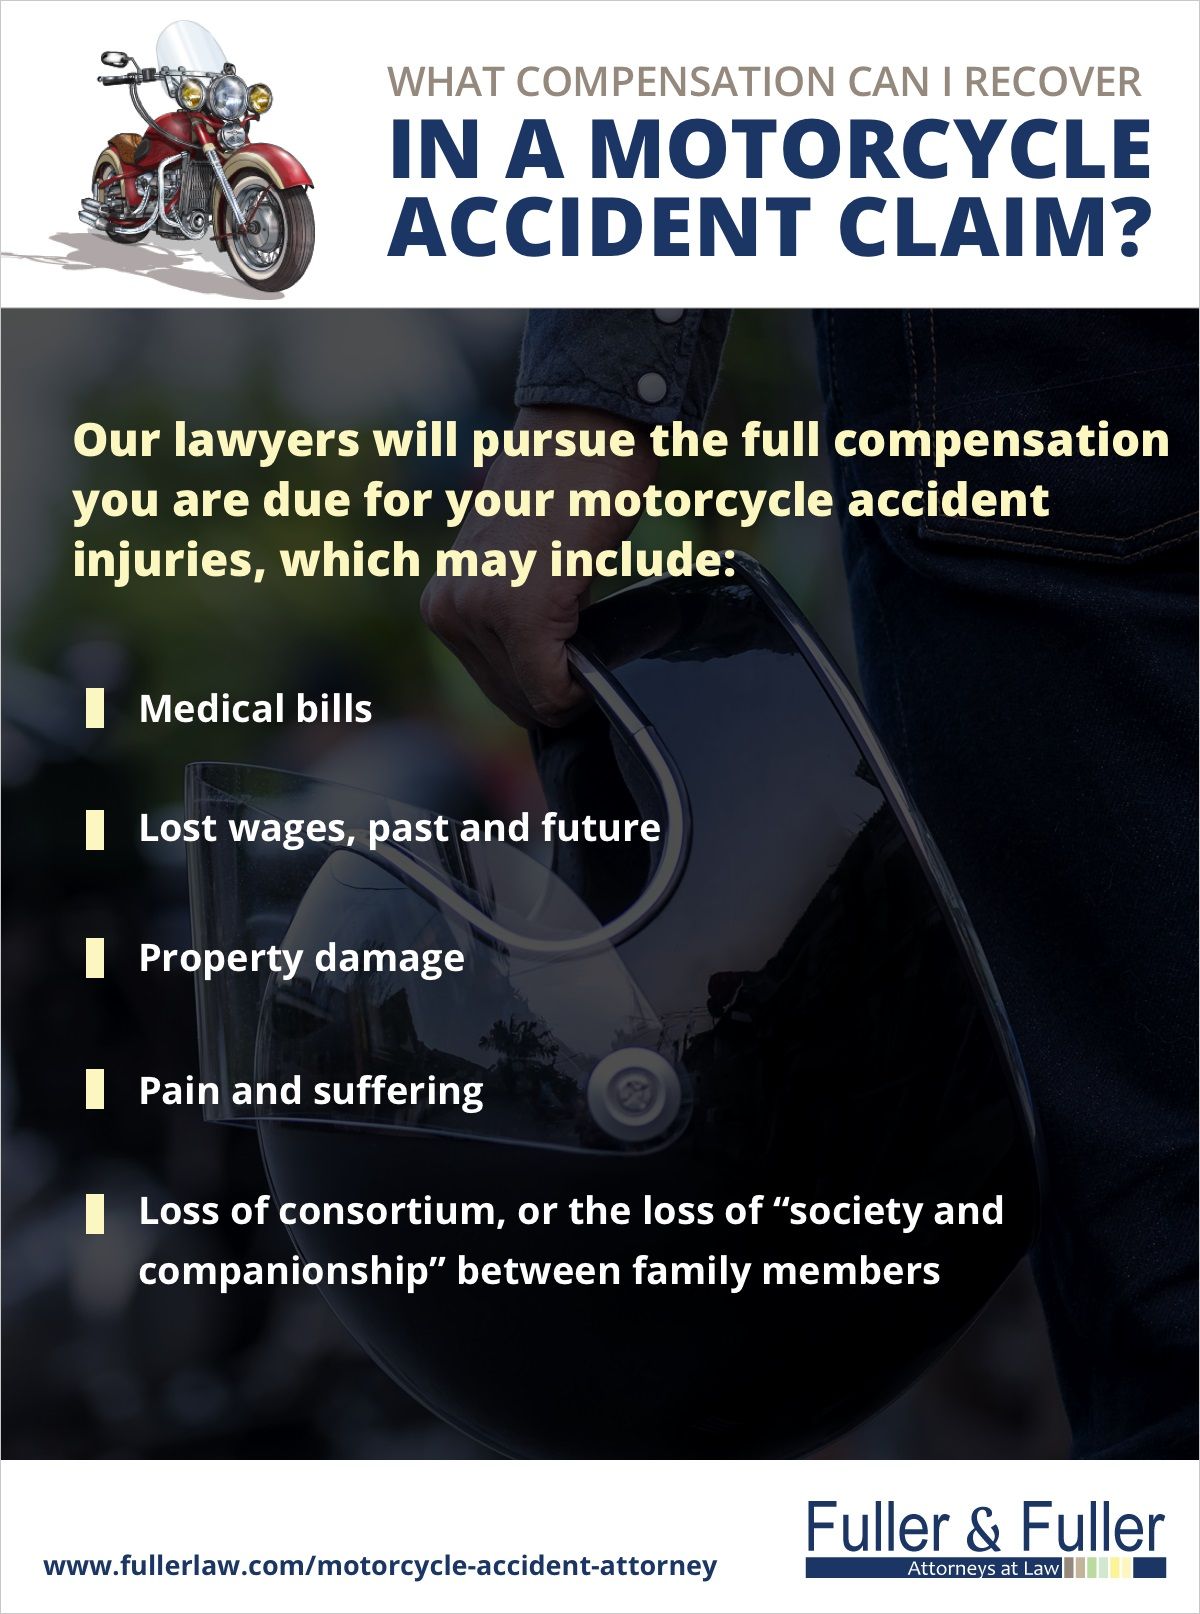 Recovering Compensation in a Motorcycle Accident Claim